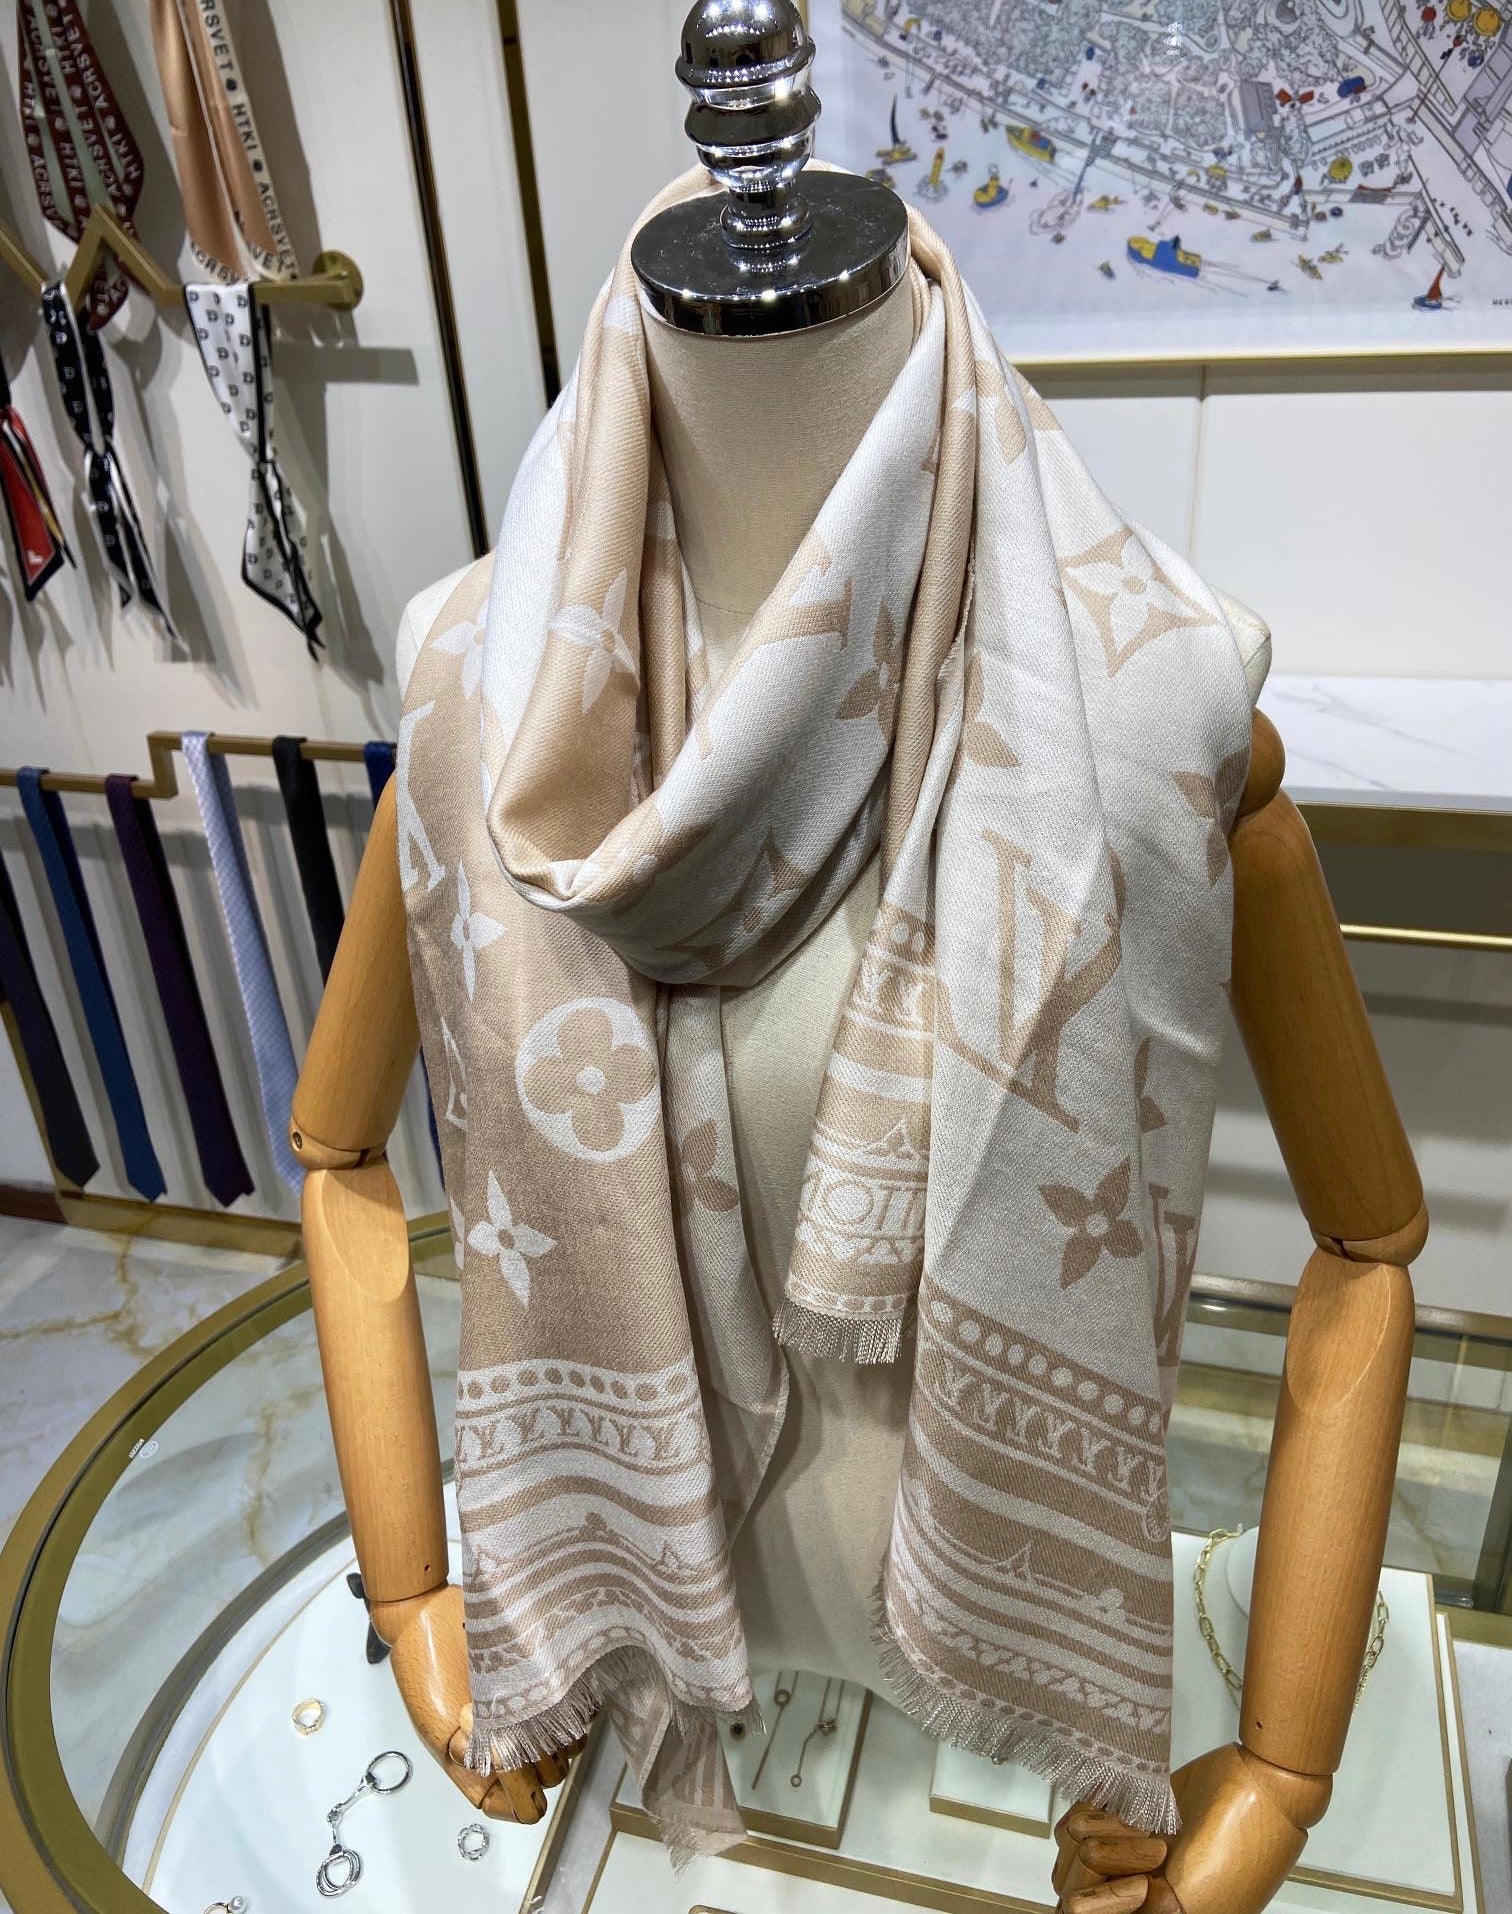 Framelines Gallery - [Louis Vuitton Scarf] Found that ideal gift for your  special one, hope to further impress him/her with your meticulous  thoughtfulness to match their home and decor with custom make